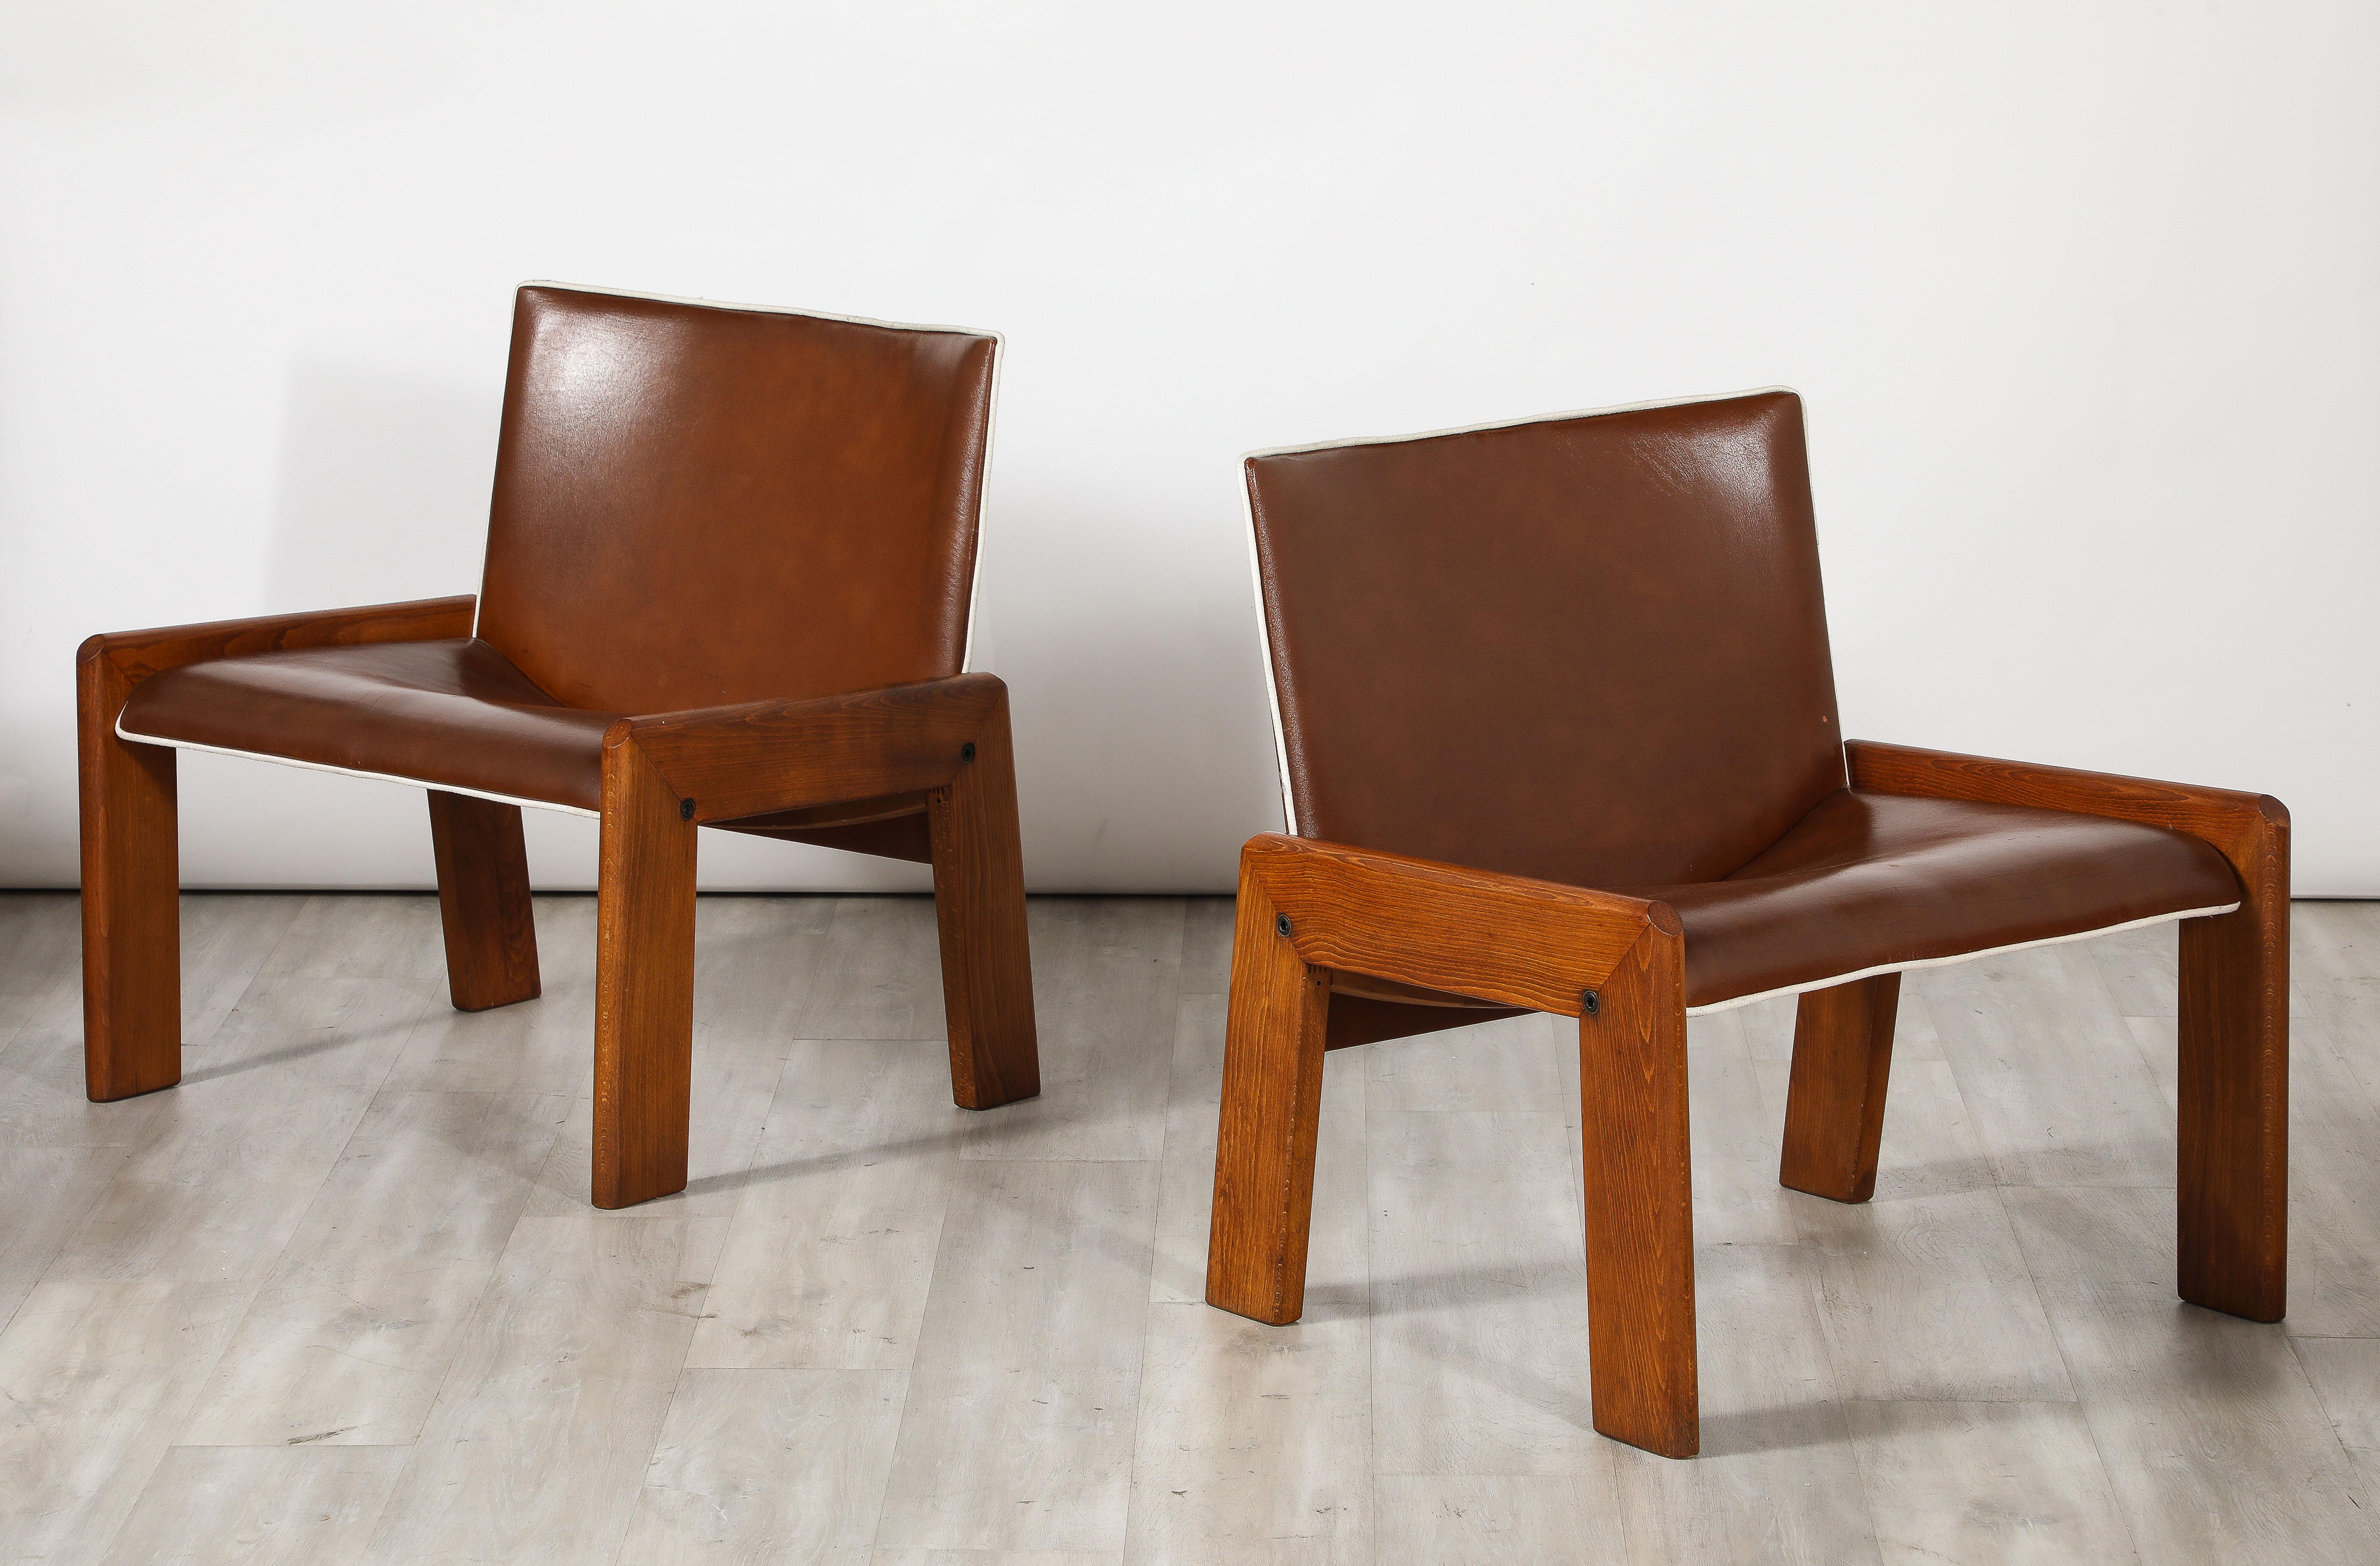 Late 20th Century Pair of Leather Side Chairs by B&T Salotti, Italy, circa 1970 For Sale